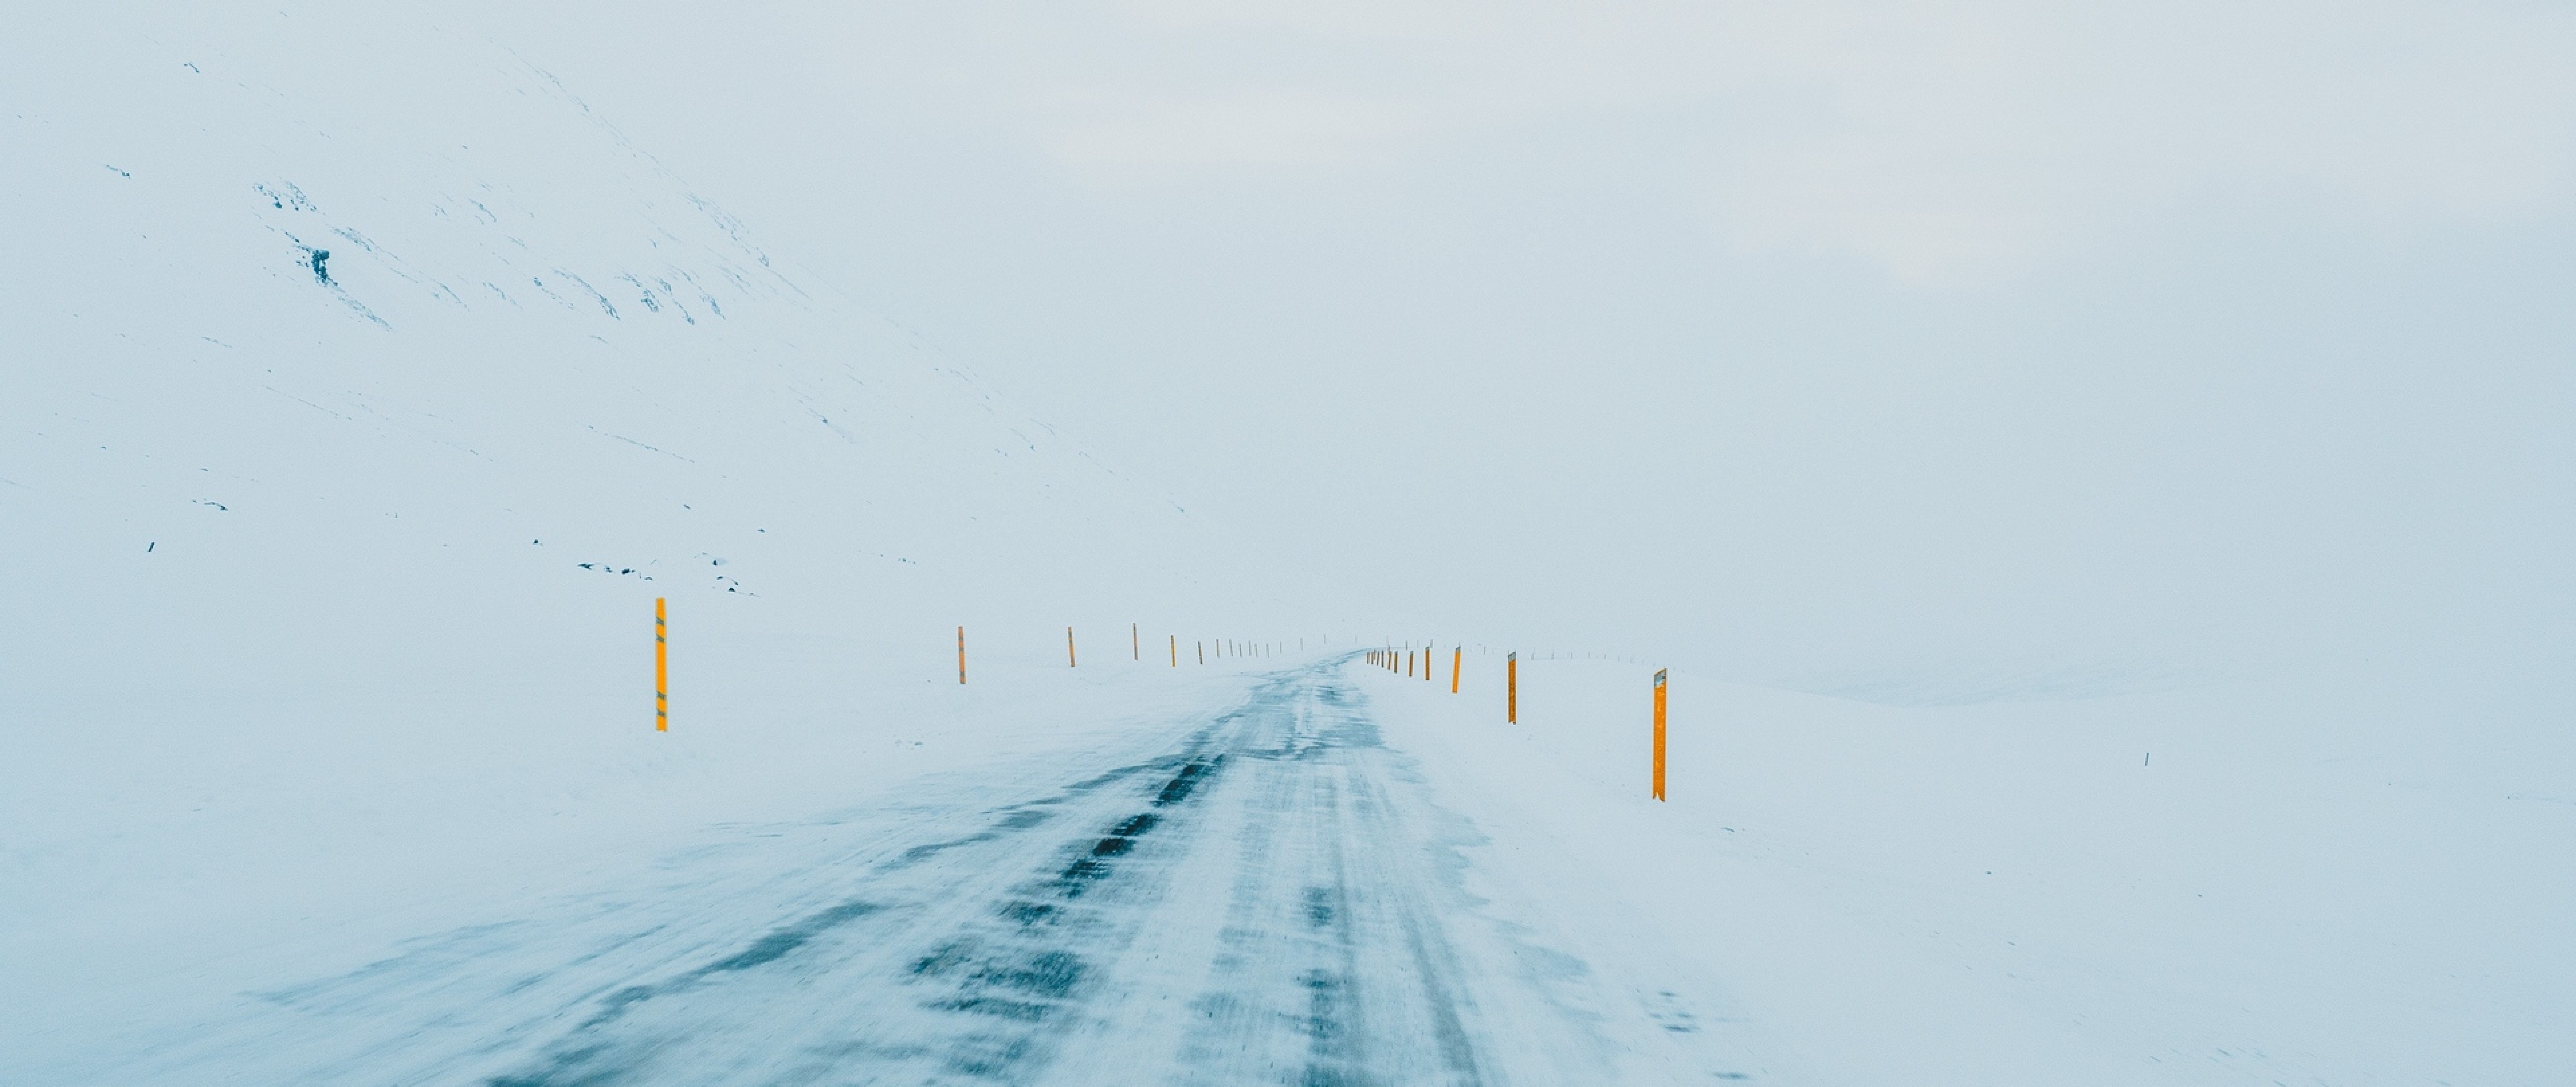 Slippery road covered in ice HD Wallpaper